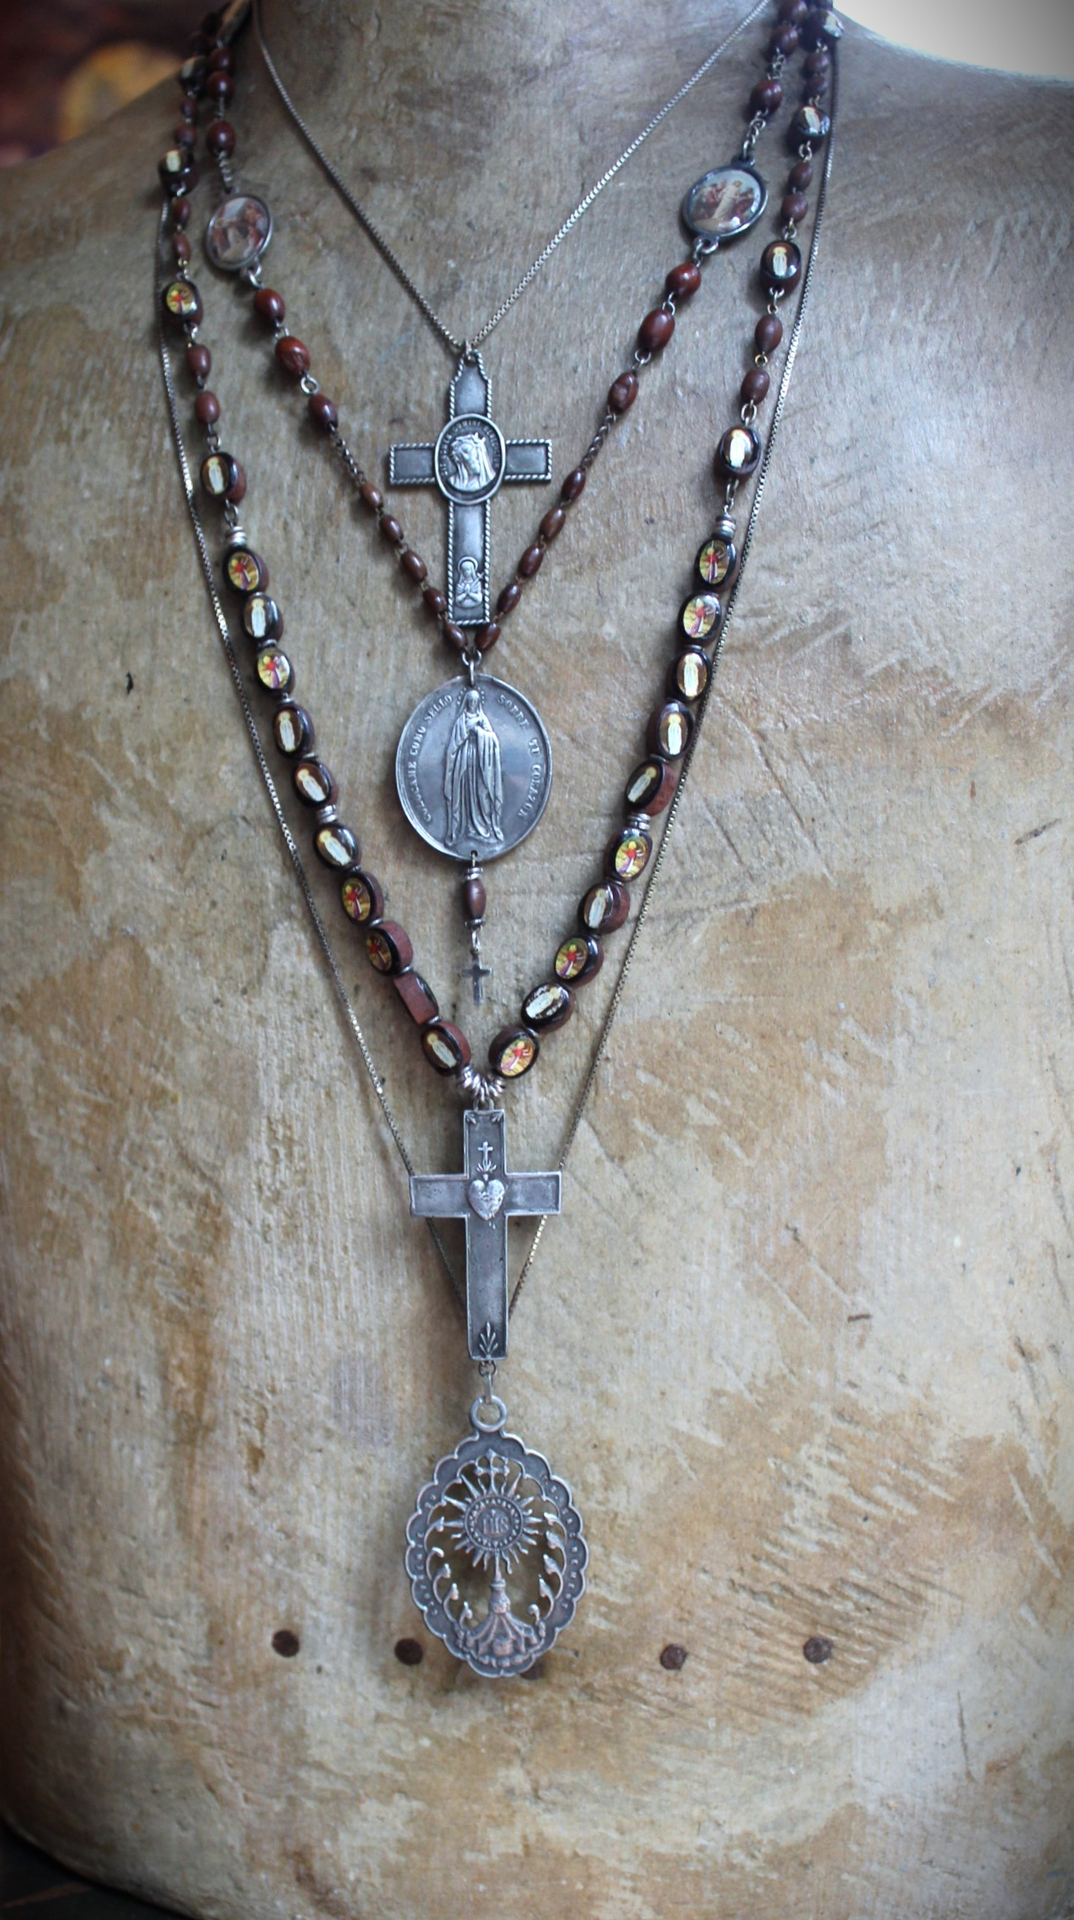 The Chalice 4 Strand Necklace with French Medals and Crosses,Vintage Cabochon Beads,Antique Rosary Chains,Sterling Chains and Sterling Clasp